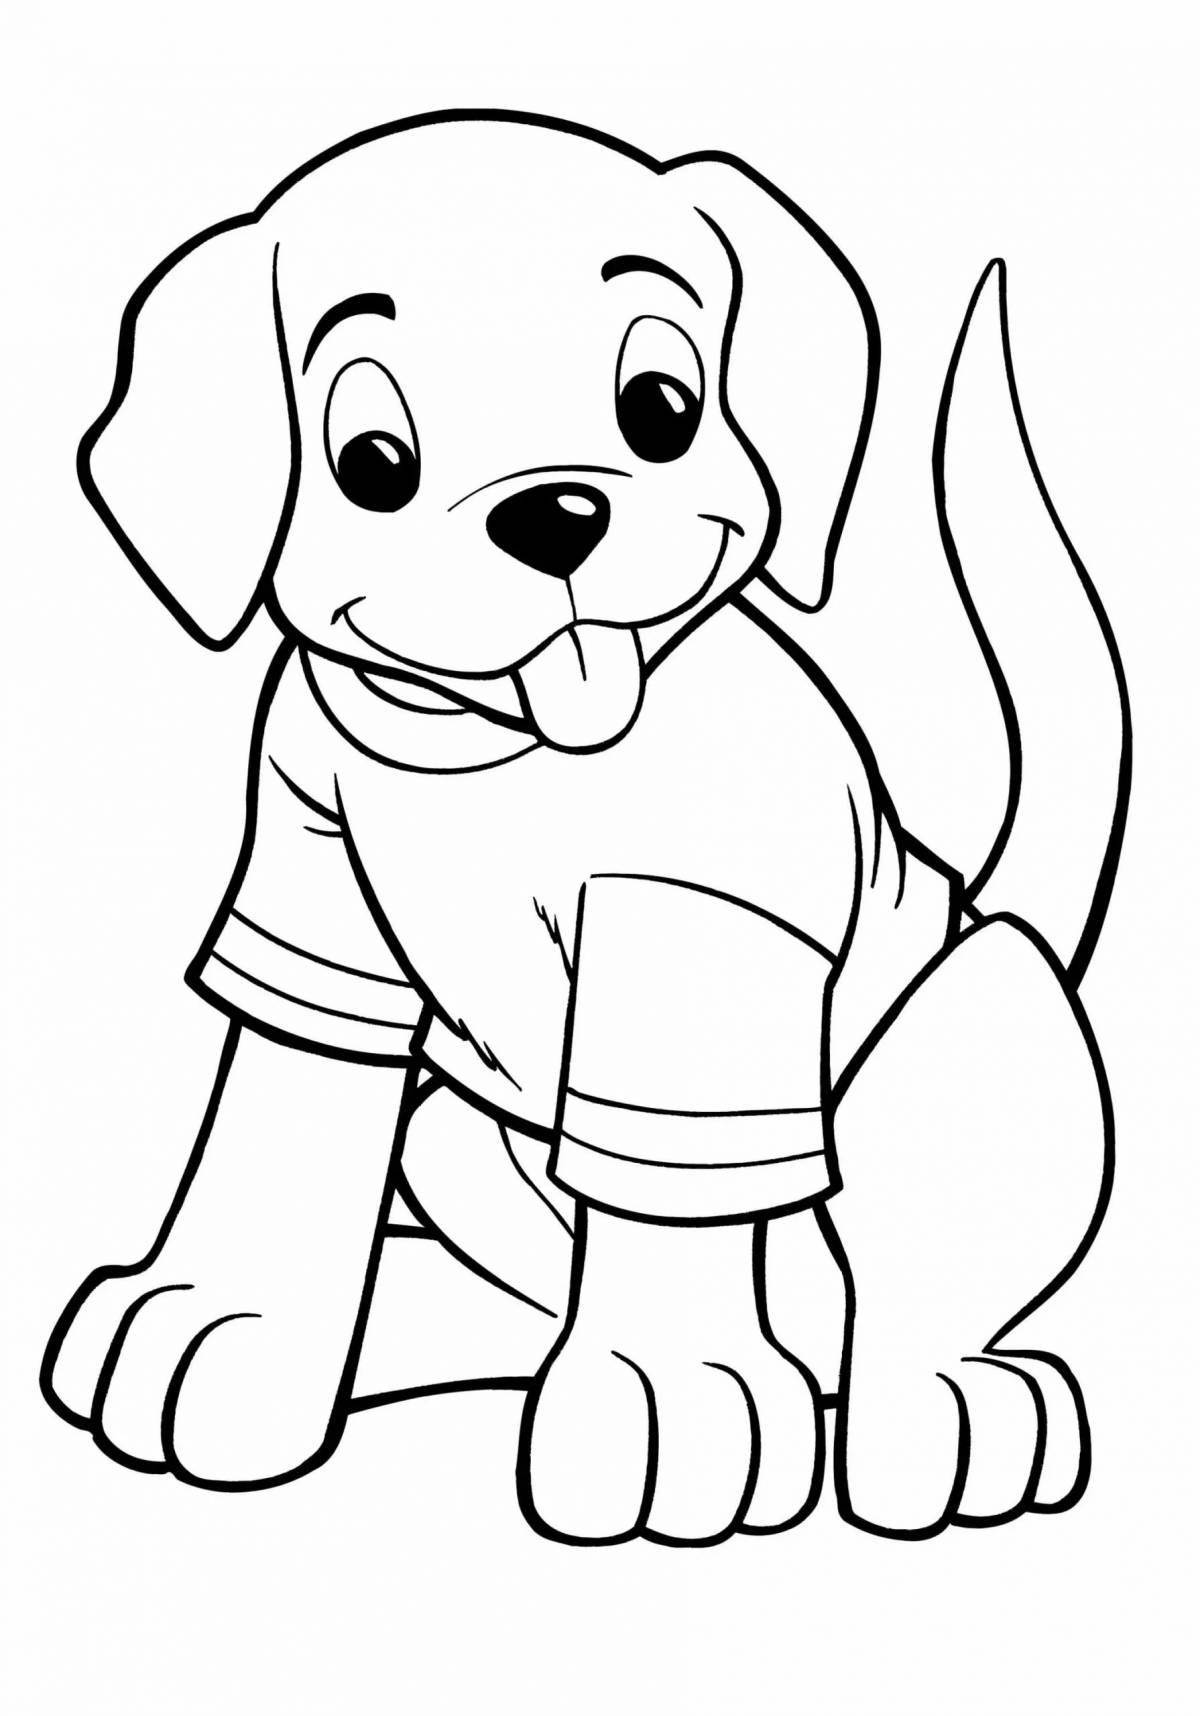 Smiling puppies coloring pages for girls